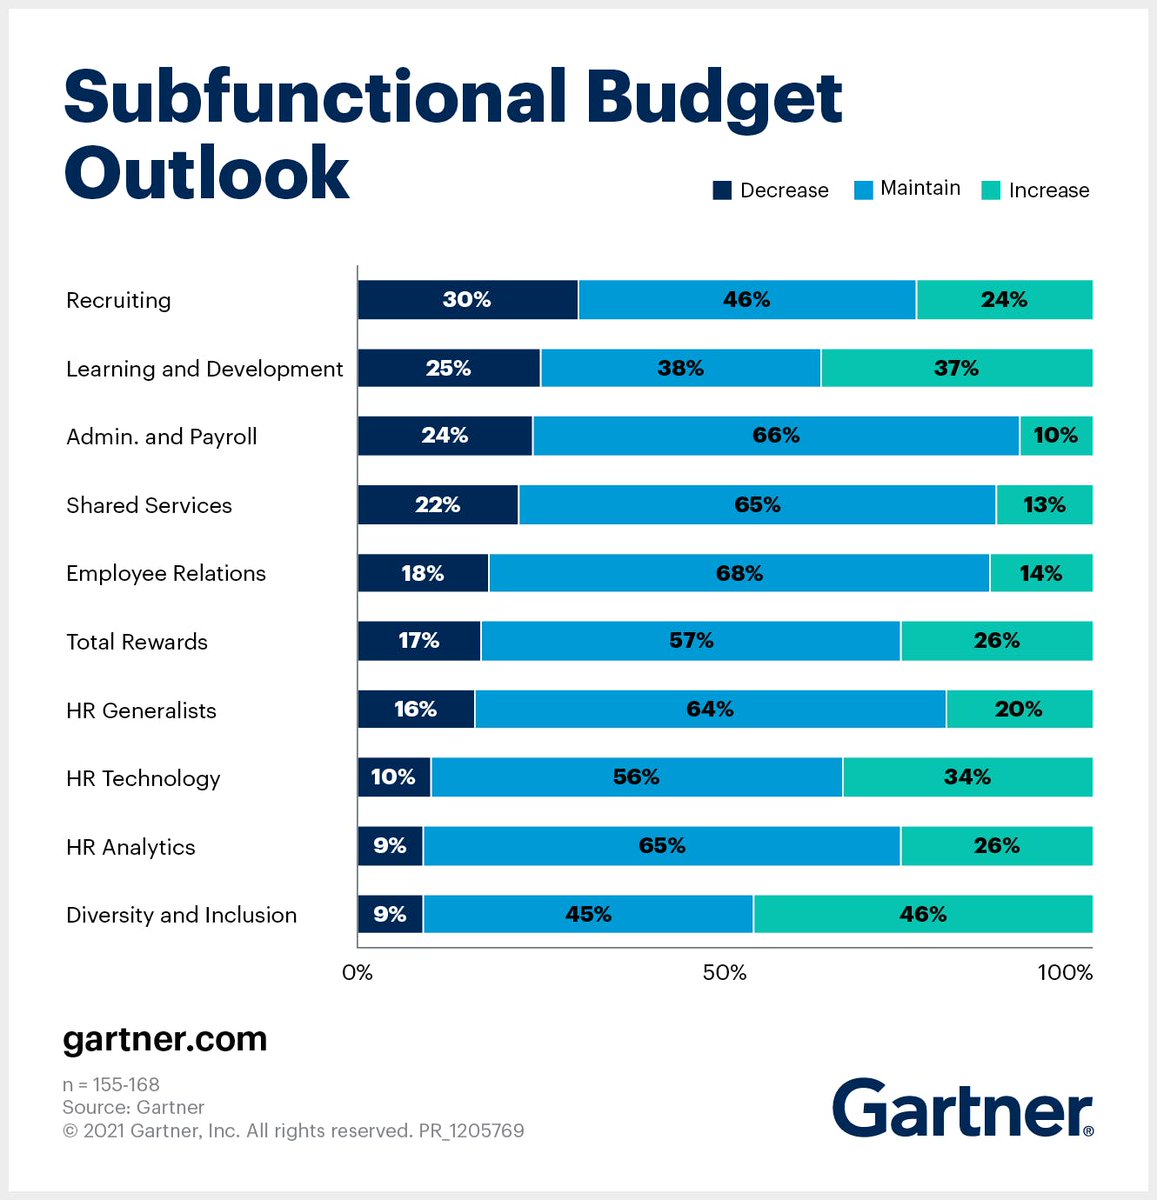 Gartner studies report that priorities in HR function budgets are likely to keep shifting in 2021 - Research shows more than one-third of respondents want to increase their HR technology budgets.

#HR #technology #futureofwork #hcmtechnology gtnr.it/3uutc53